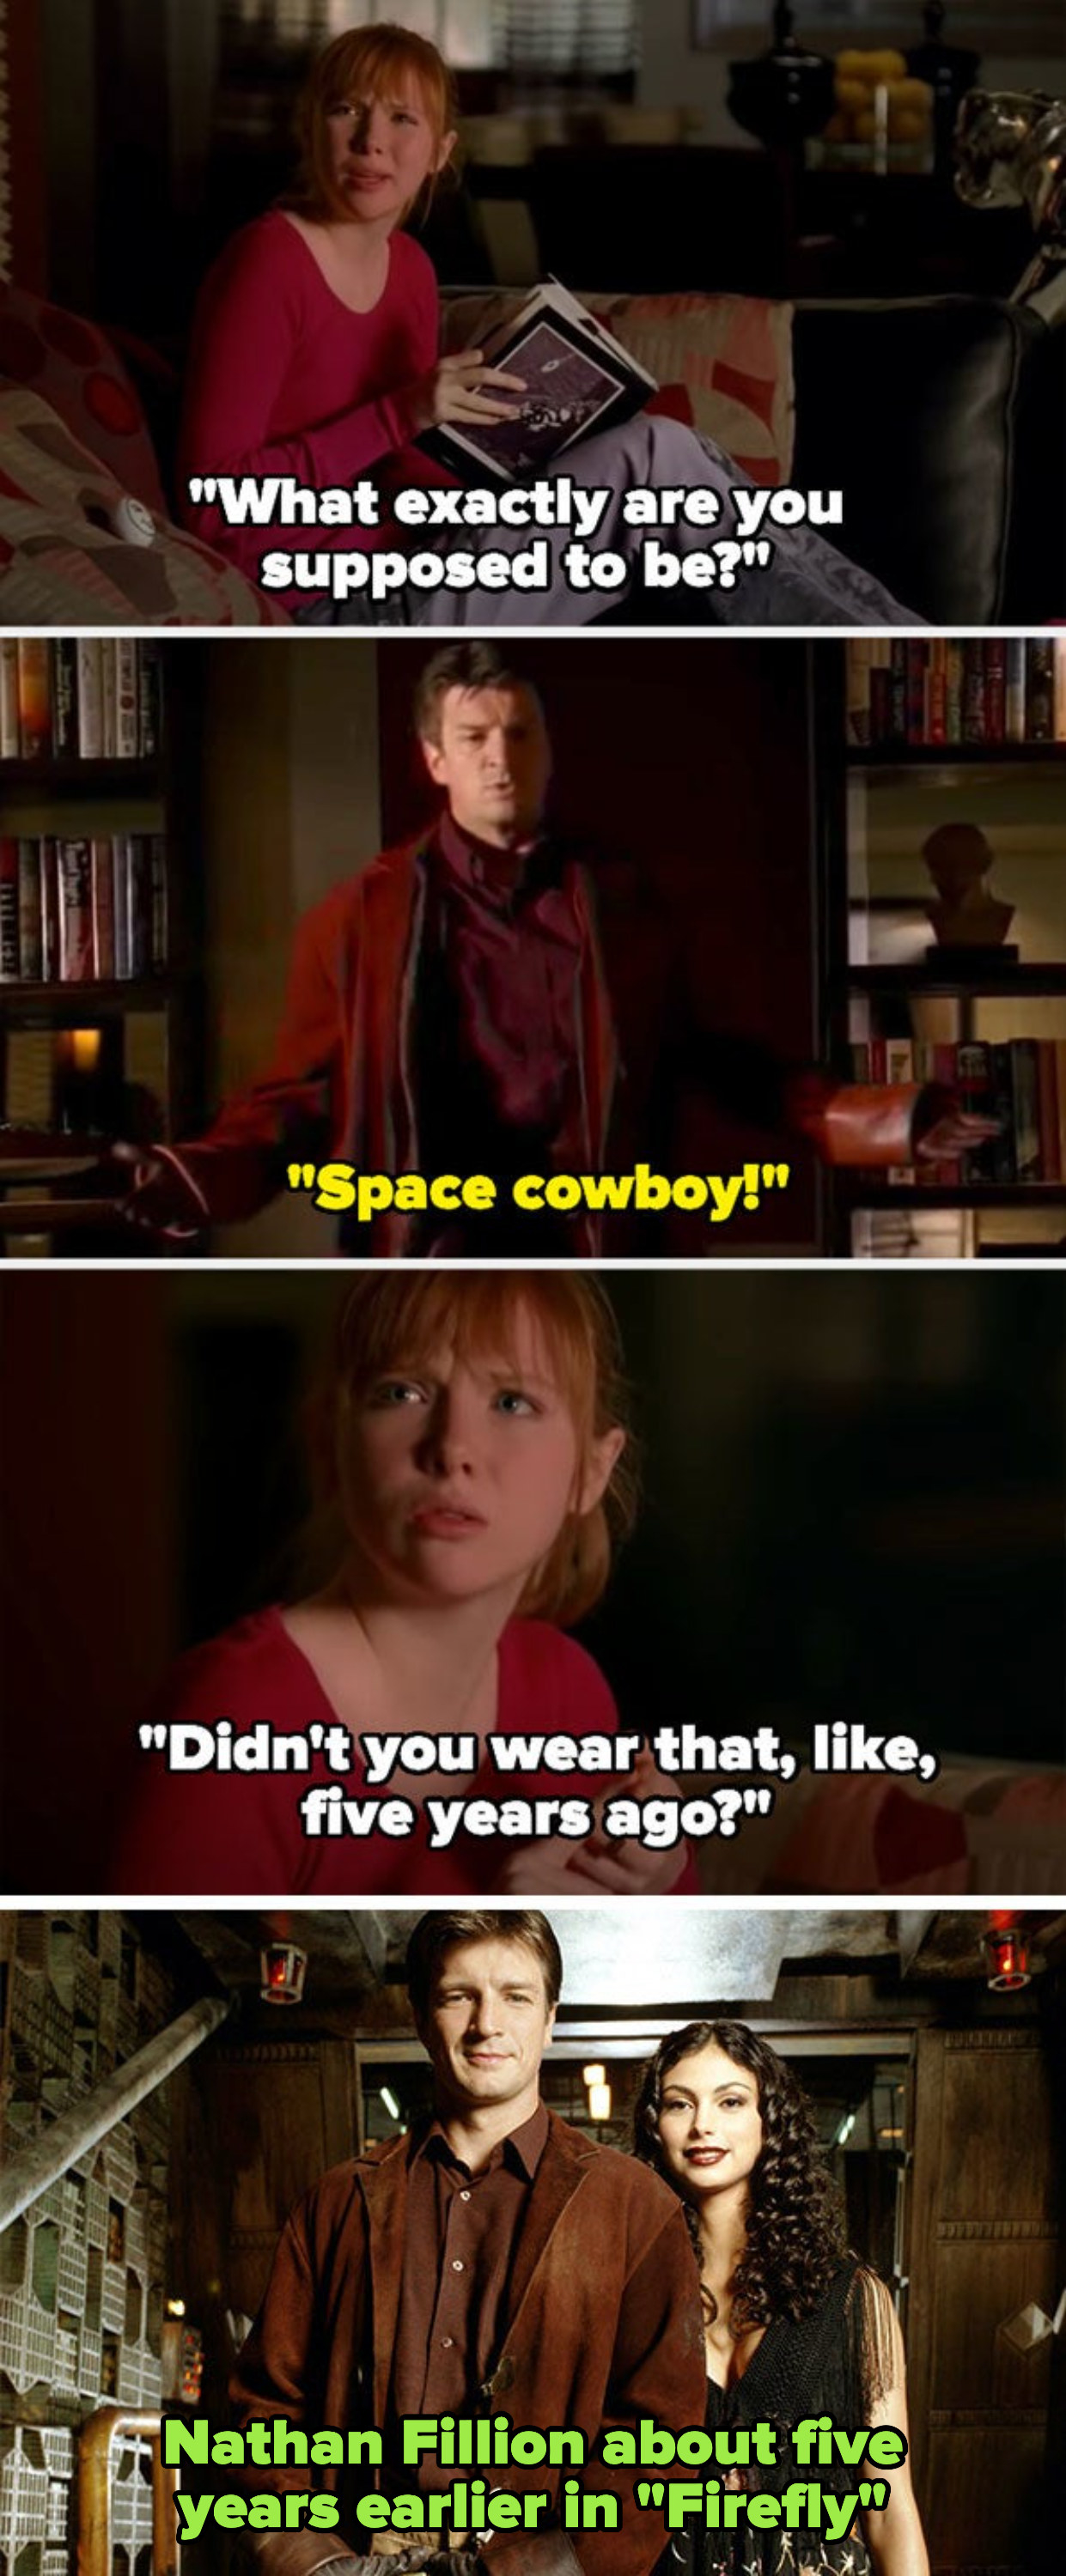 Castle&#x27;s daughter asks him what he&#x27;s supposed to be, and Castle says &quot;space cowboy,&quot; donning his costume from &quot;Firefly&quot; — his daughter says he wore it 5 years ago